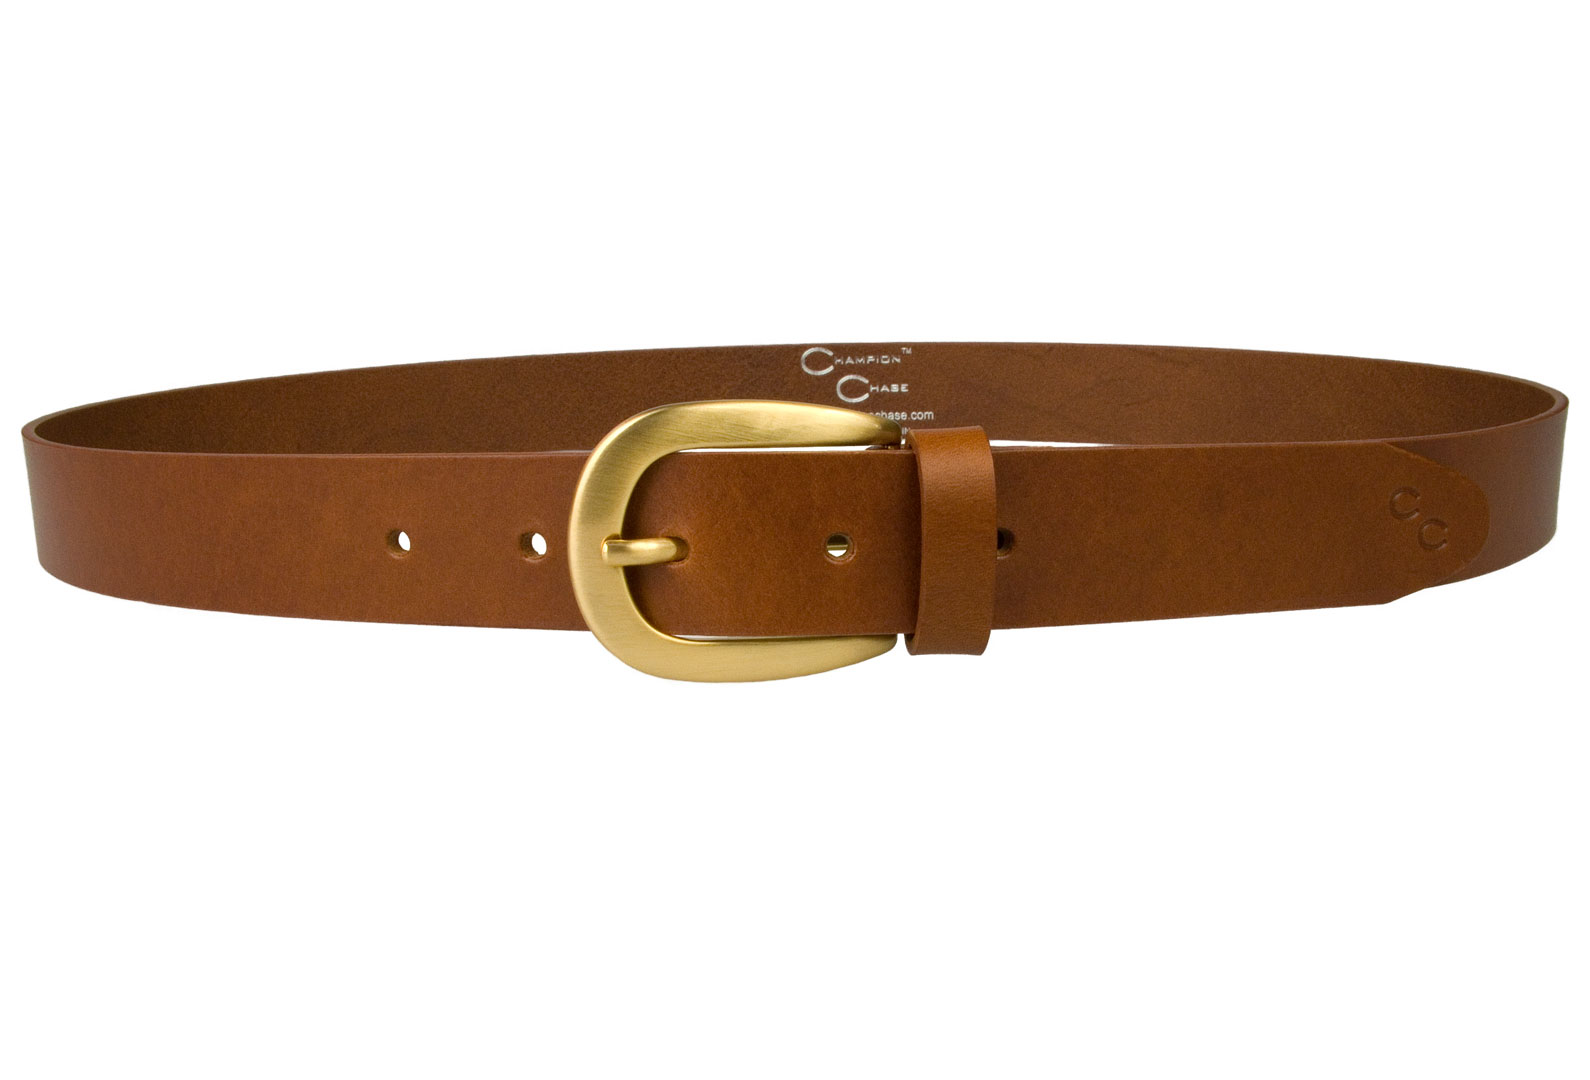 Womens Tan Leather Belt With Brushed Gold Buckle - Belt Designs